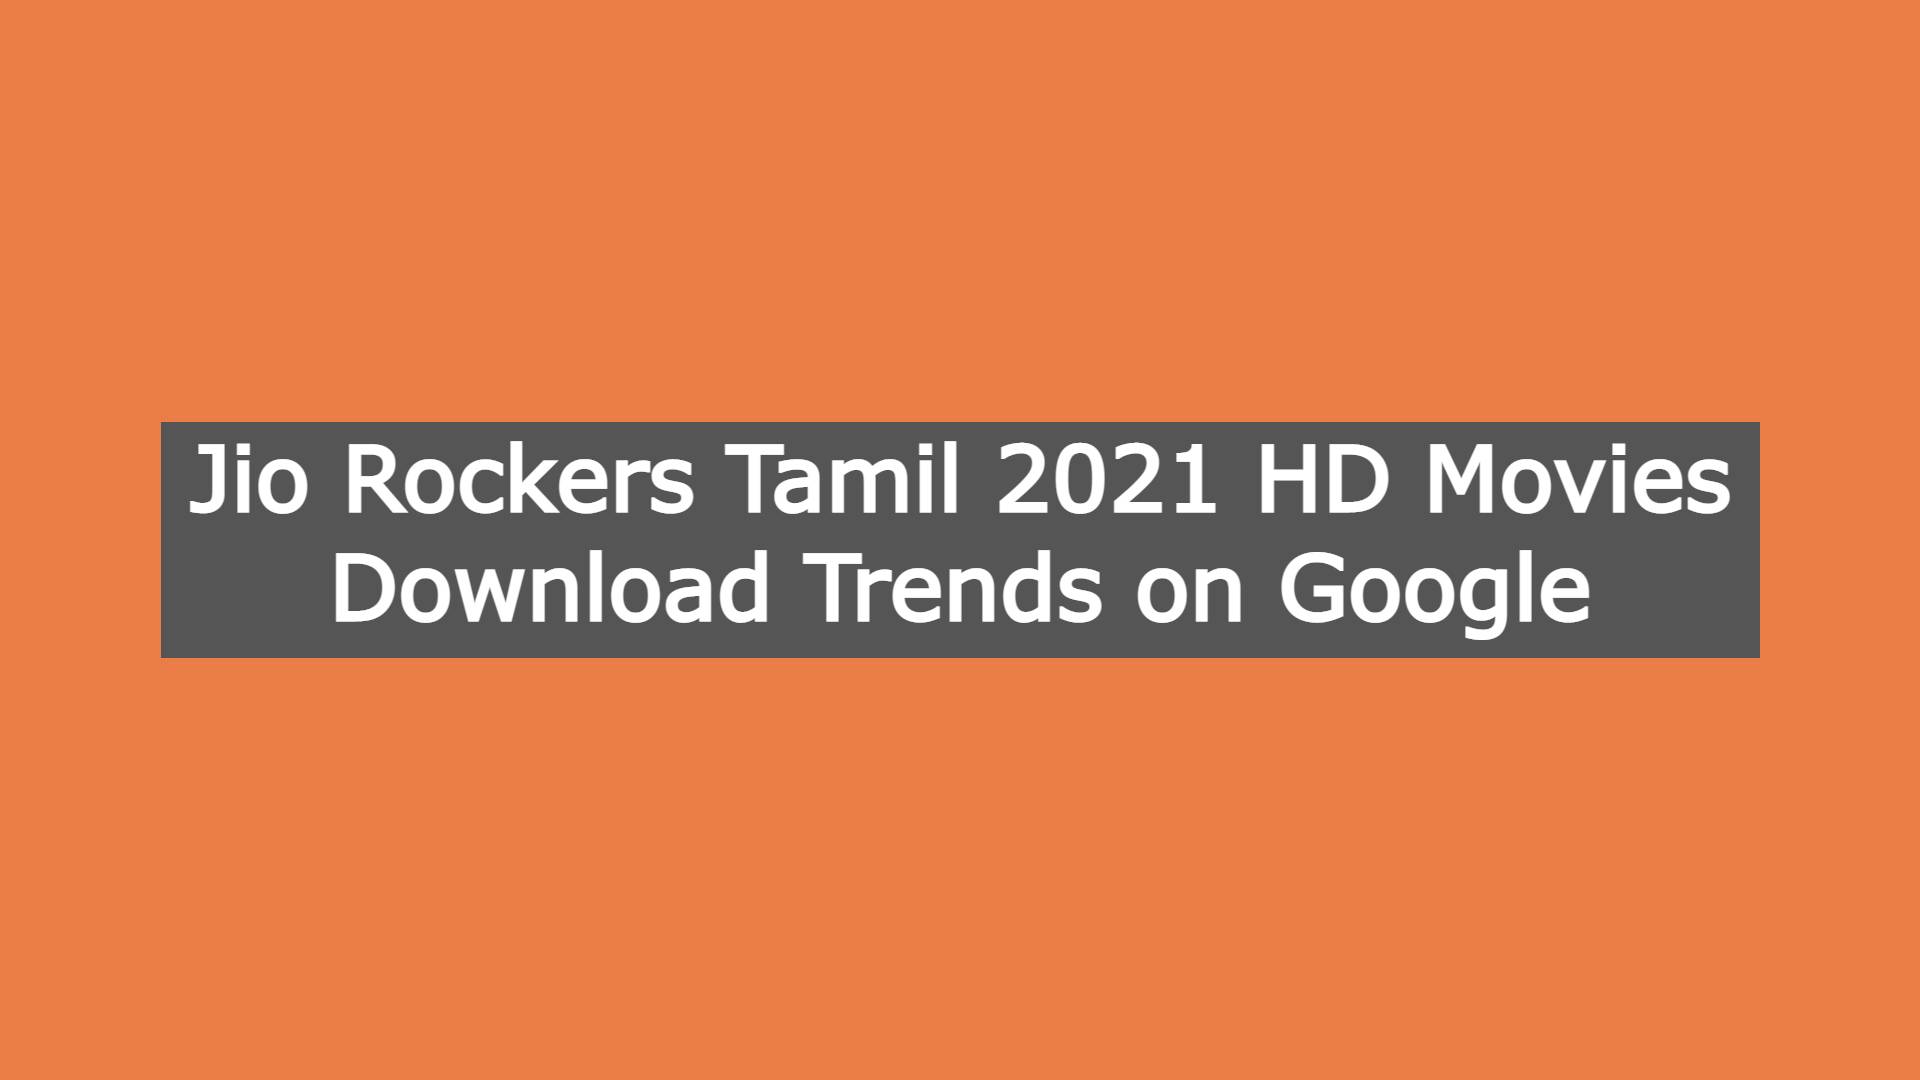 Jio Rockers Tamil 2021 HD Movies Download Trends on Google